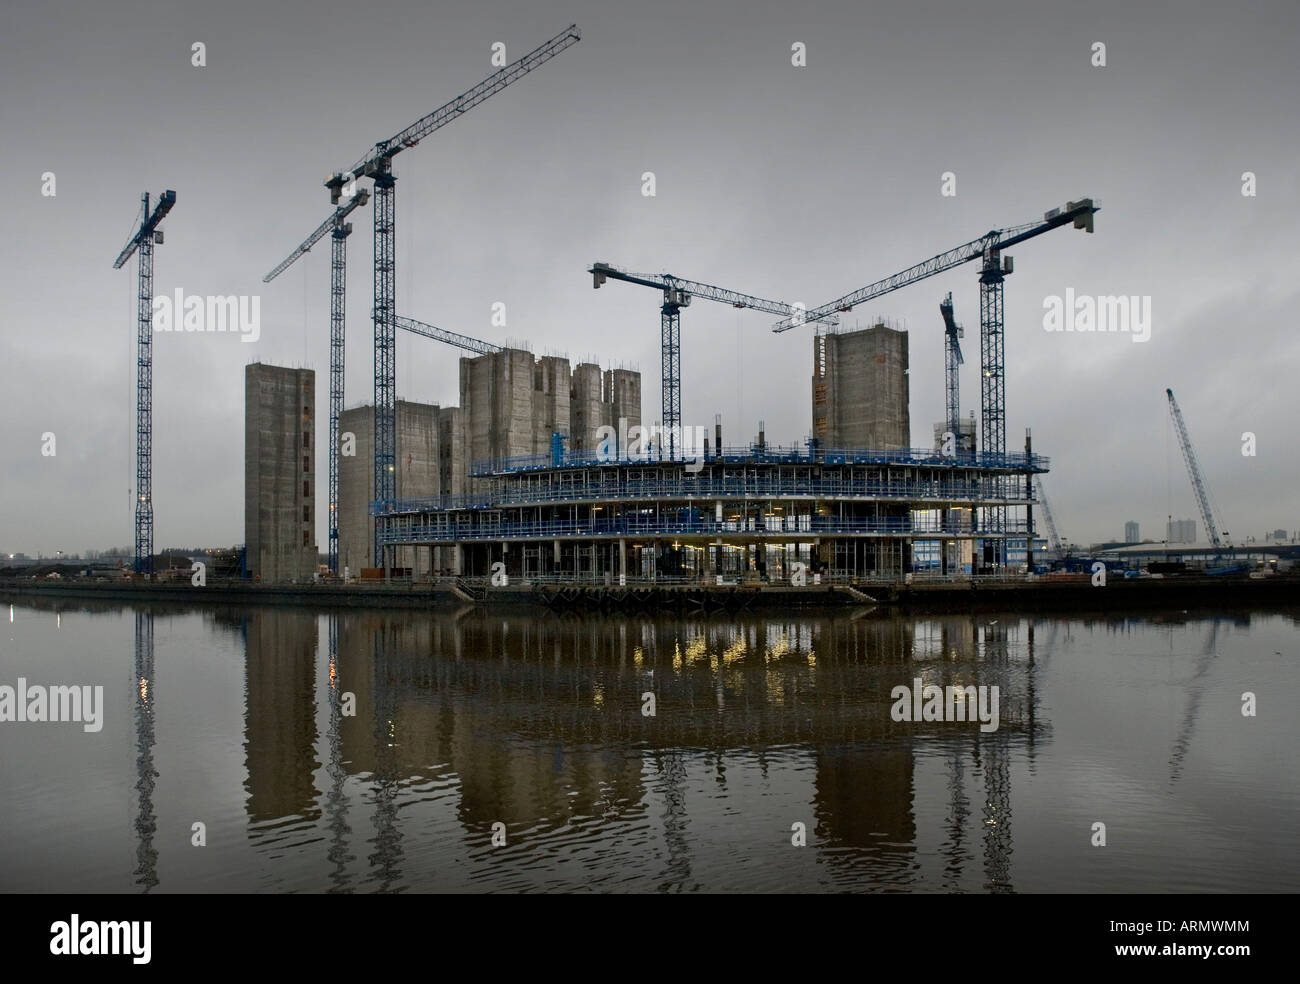 THE NEW BBC OFFICES UNDER CONSTRUCTION AT SALFORD QUAYS MANCHESTER THE MULTI MILLION POUND DEVELOPMENT Stock Photo